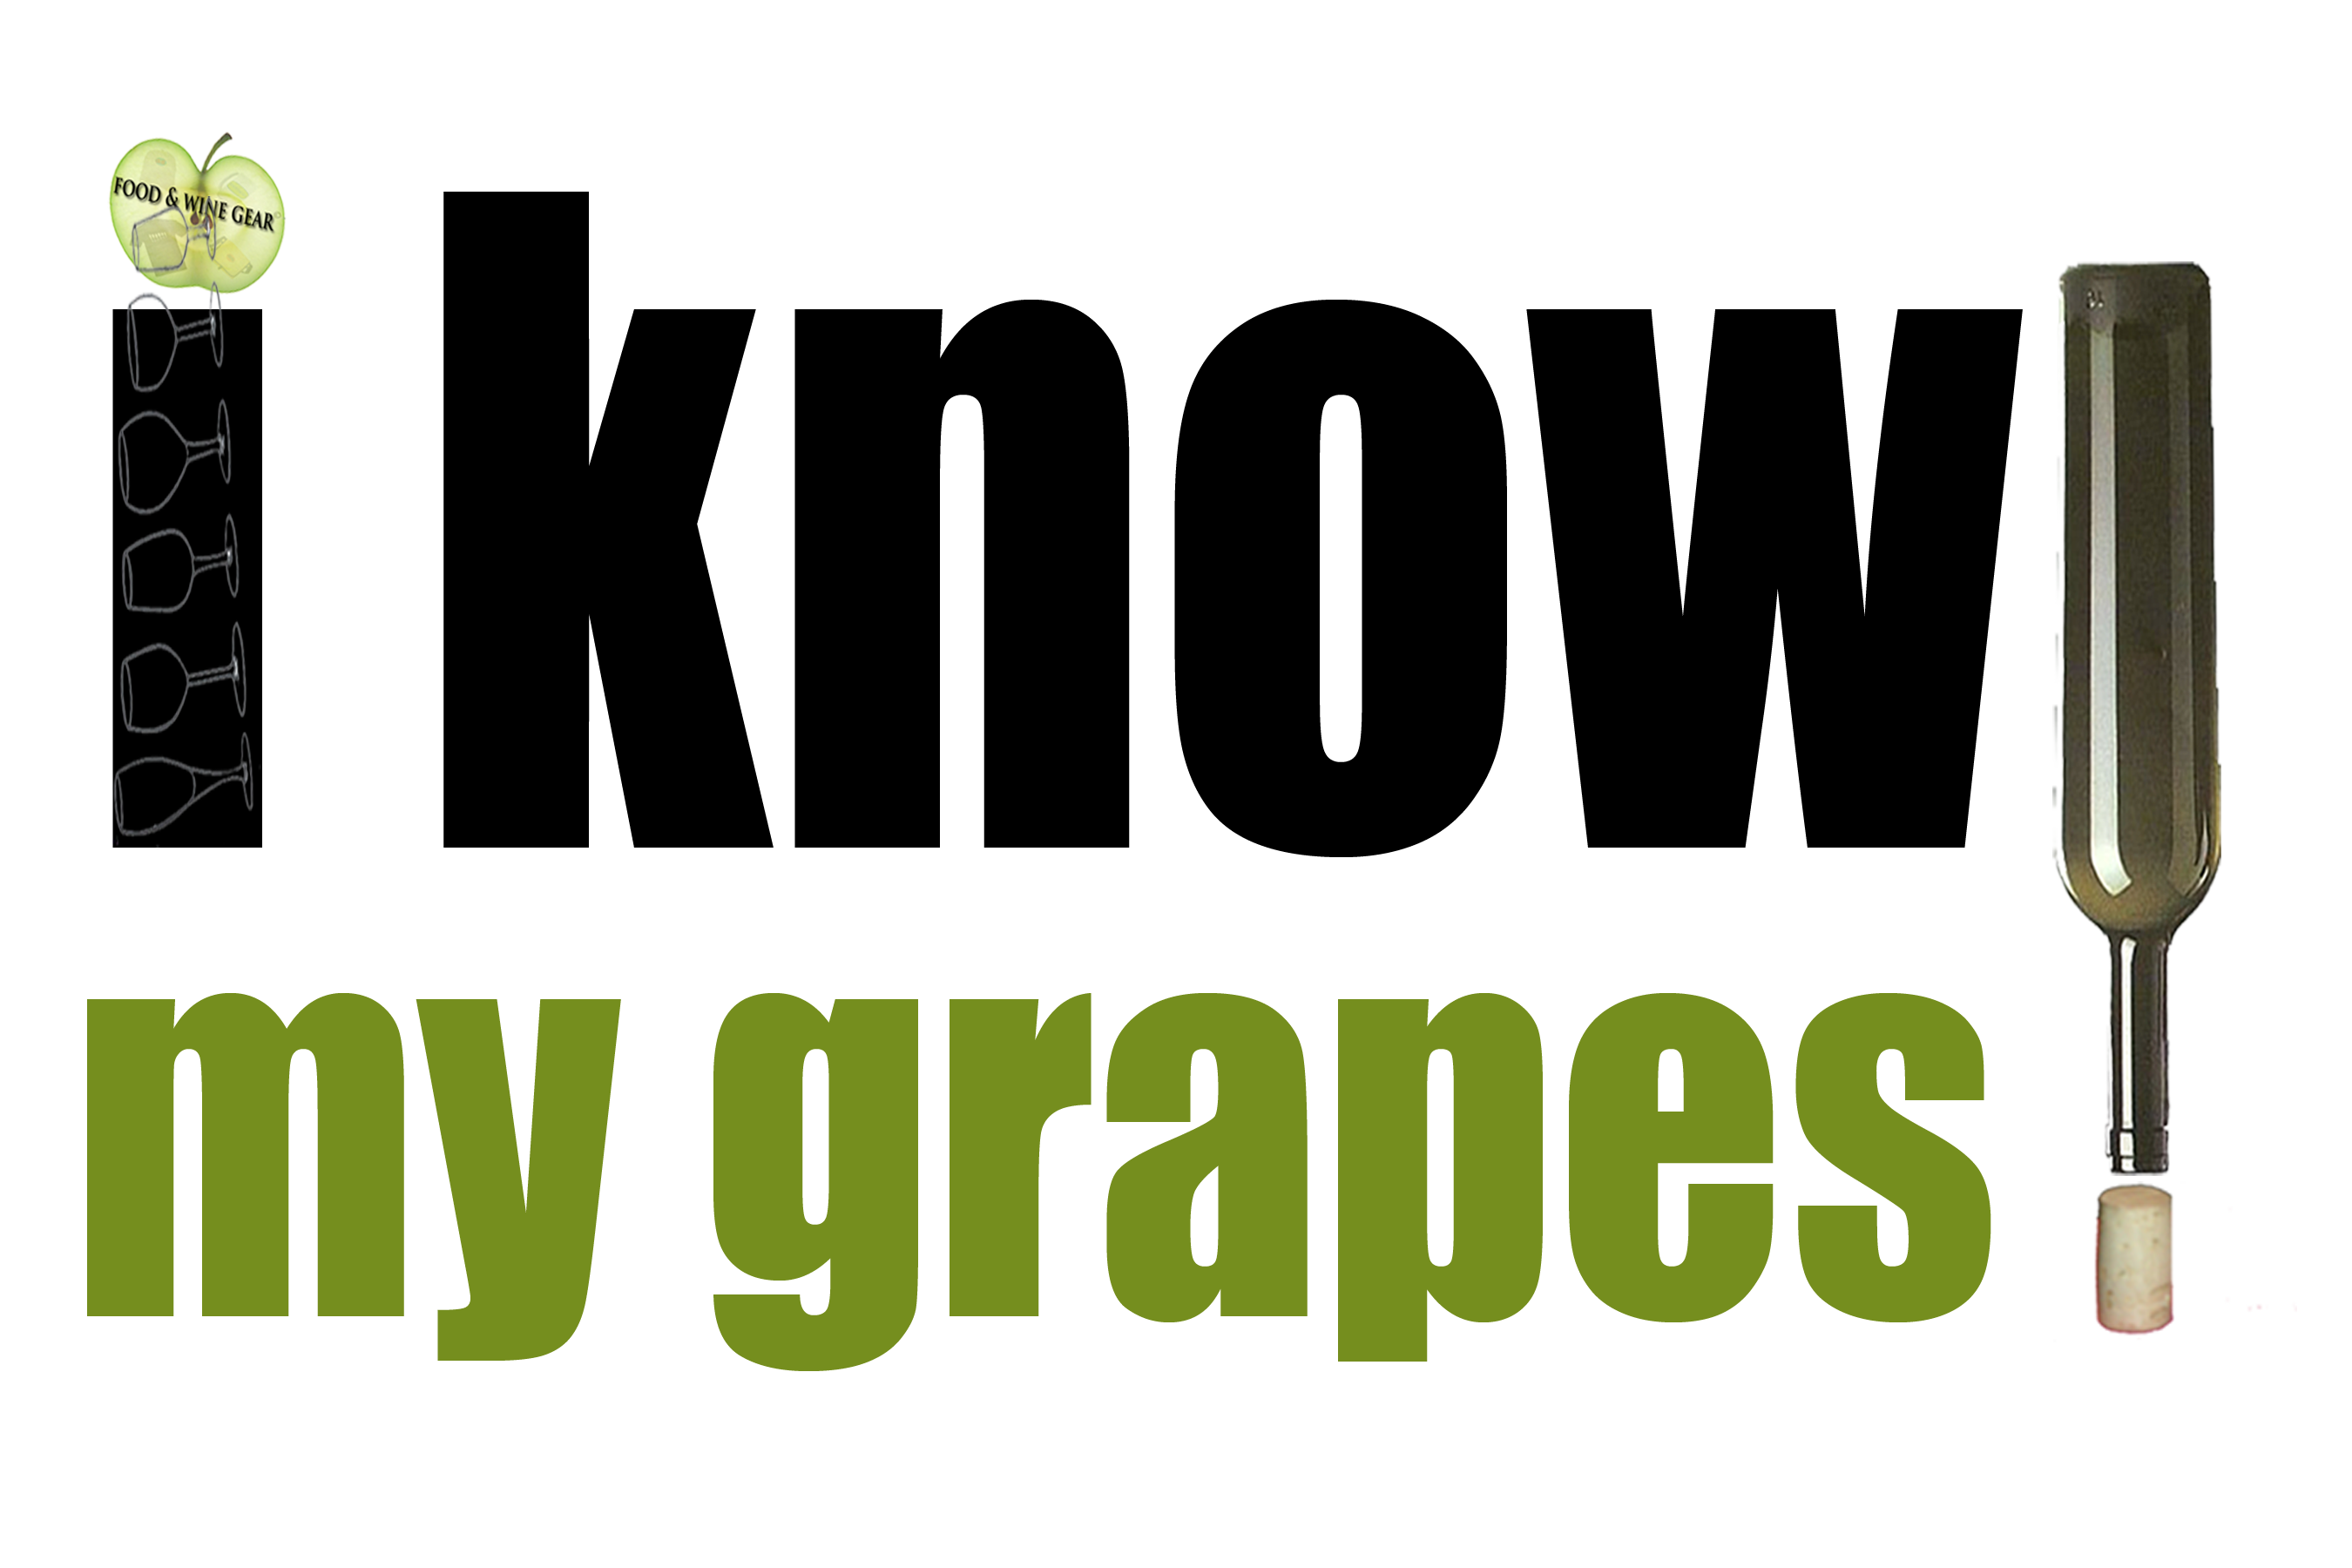 know my grapes